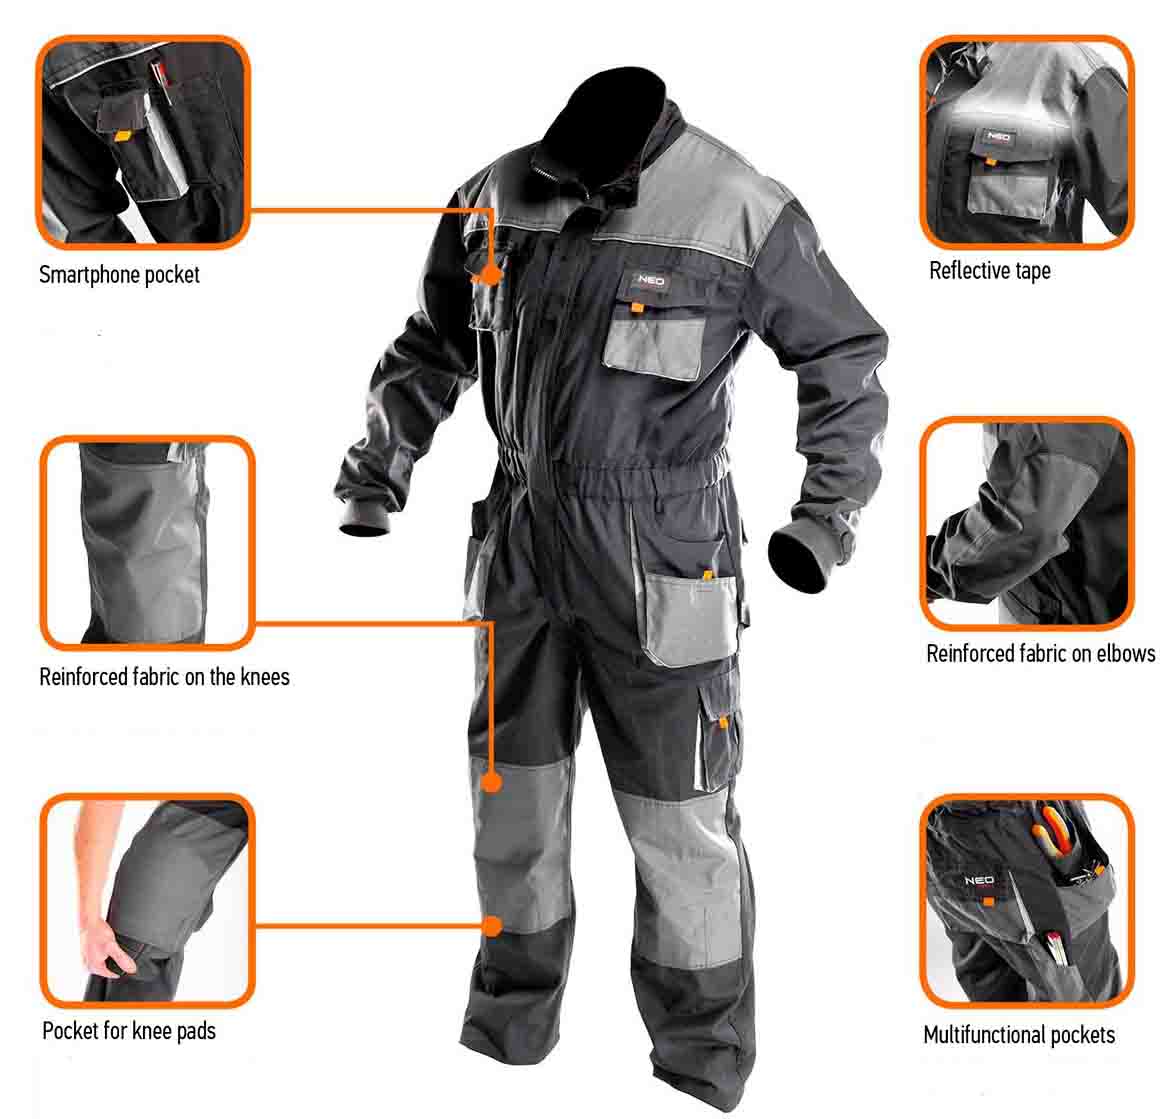 NEO WORKWEAR OVERALLS L